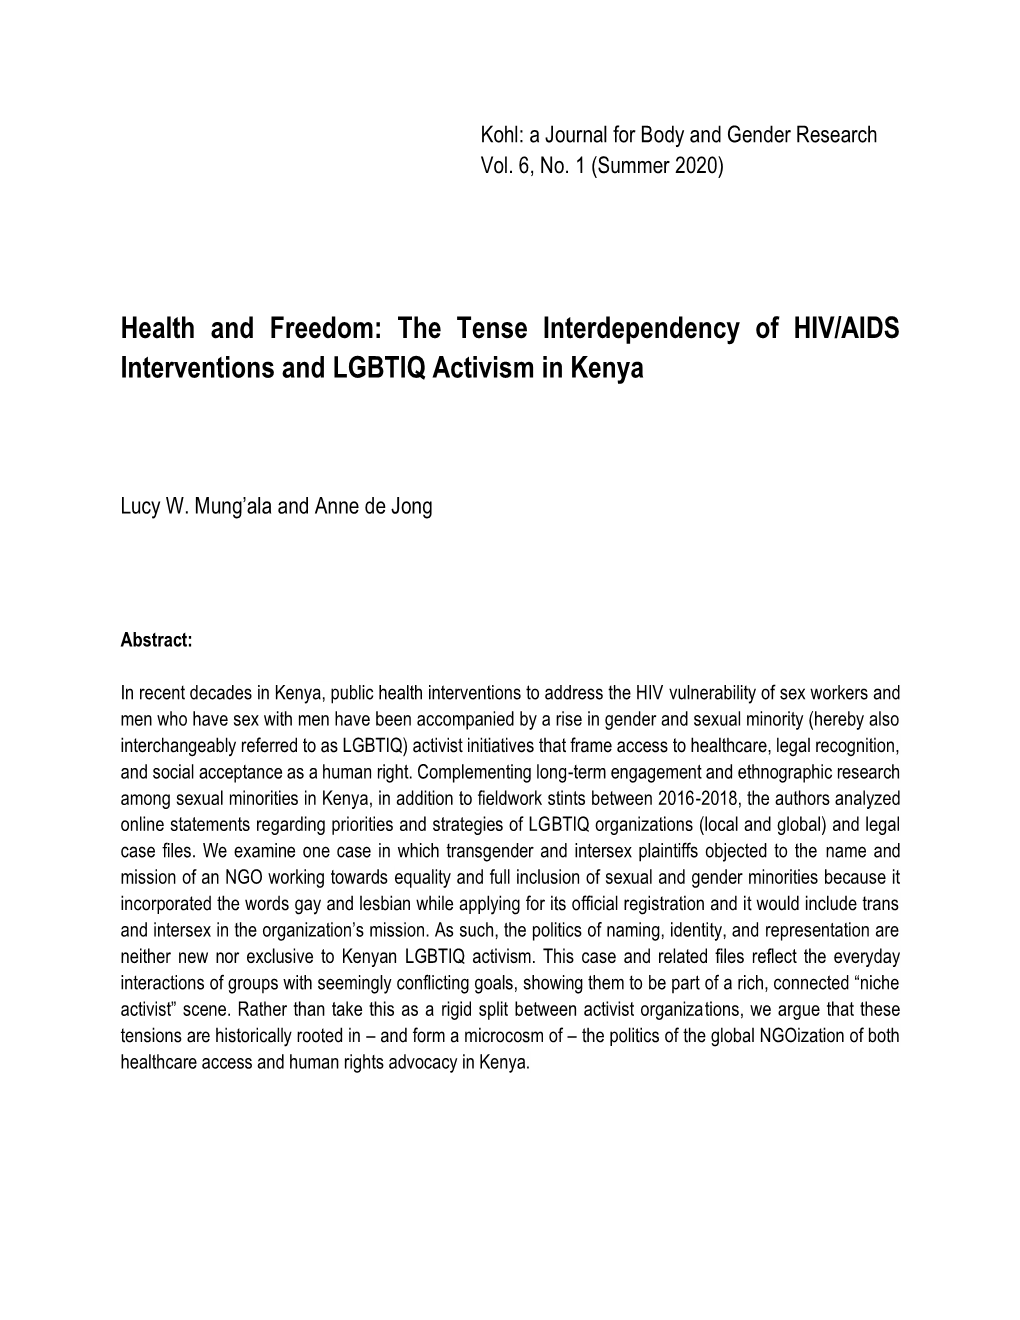 The Tense Interdependency of HIV/AIDS Interventions and LGBTIQ Activism in Kenya